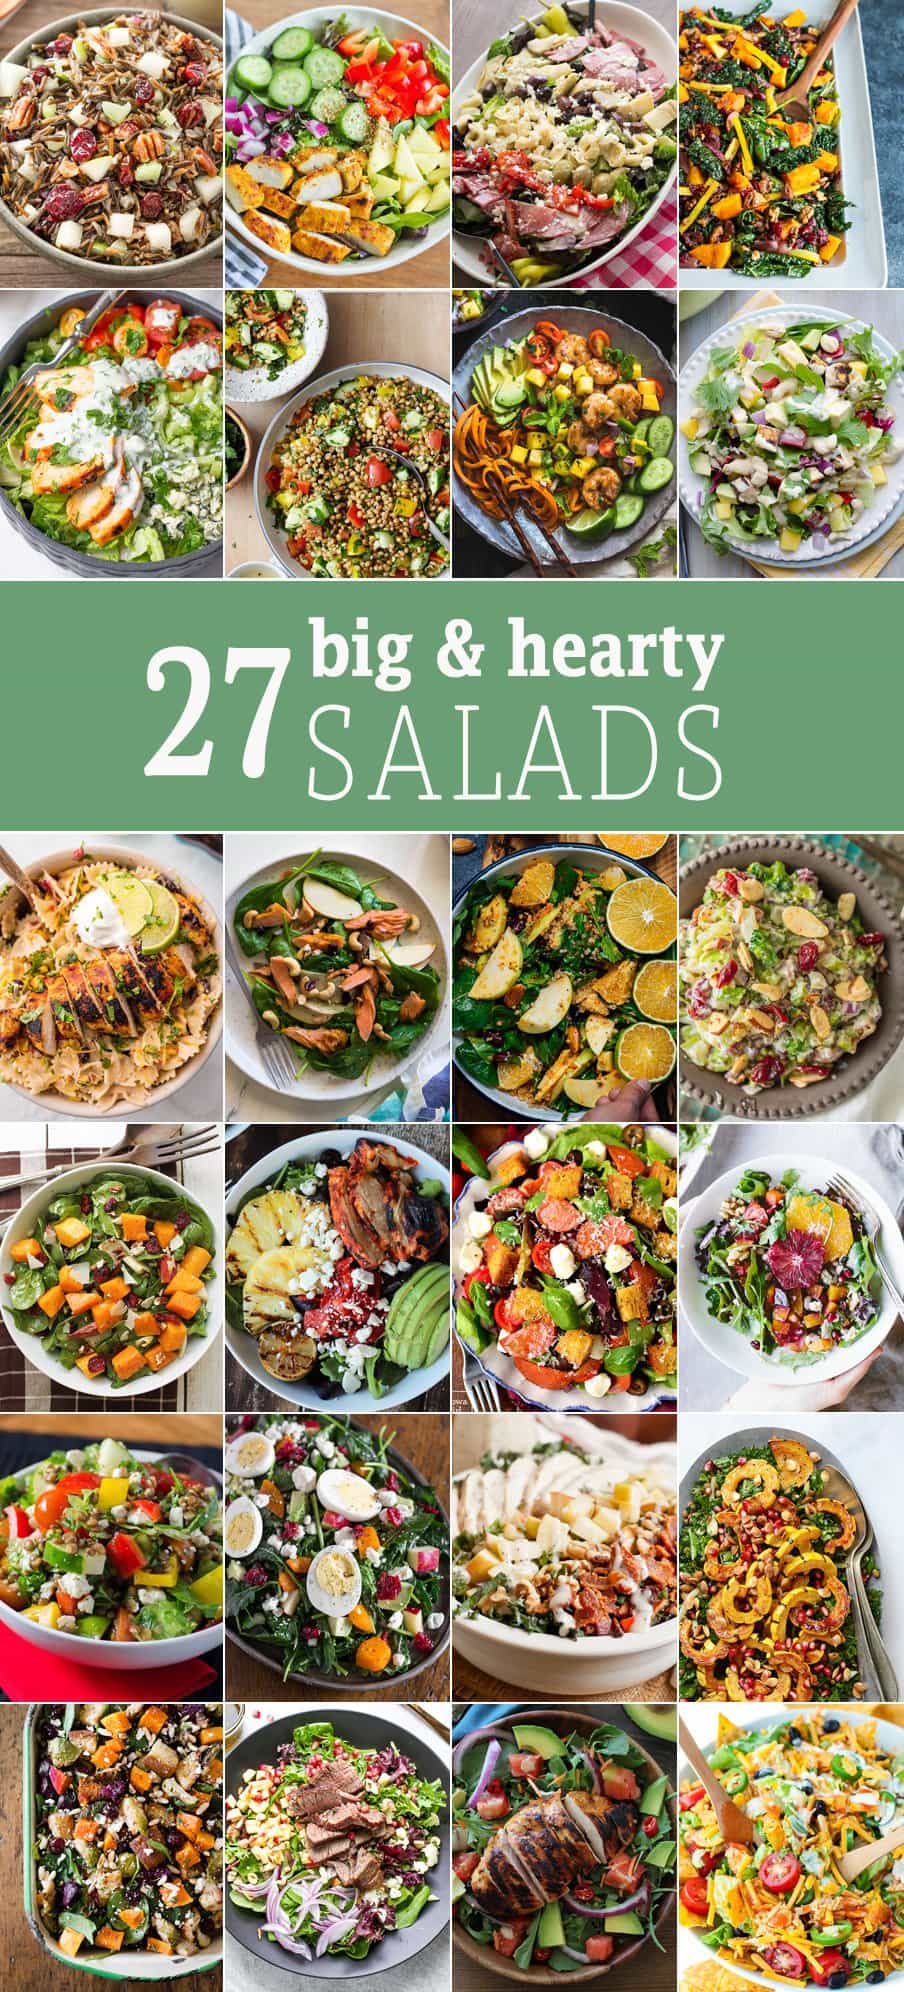 These 27 BIG HEARTY SALADS are the perfect healthy recipe for those New Years resolutions! Every type of salad you can imagine...so easy and delicious! Eating healthy can be delicious!